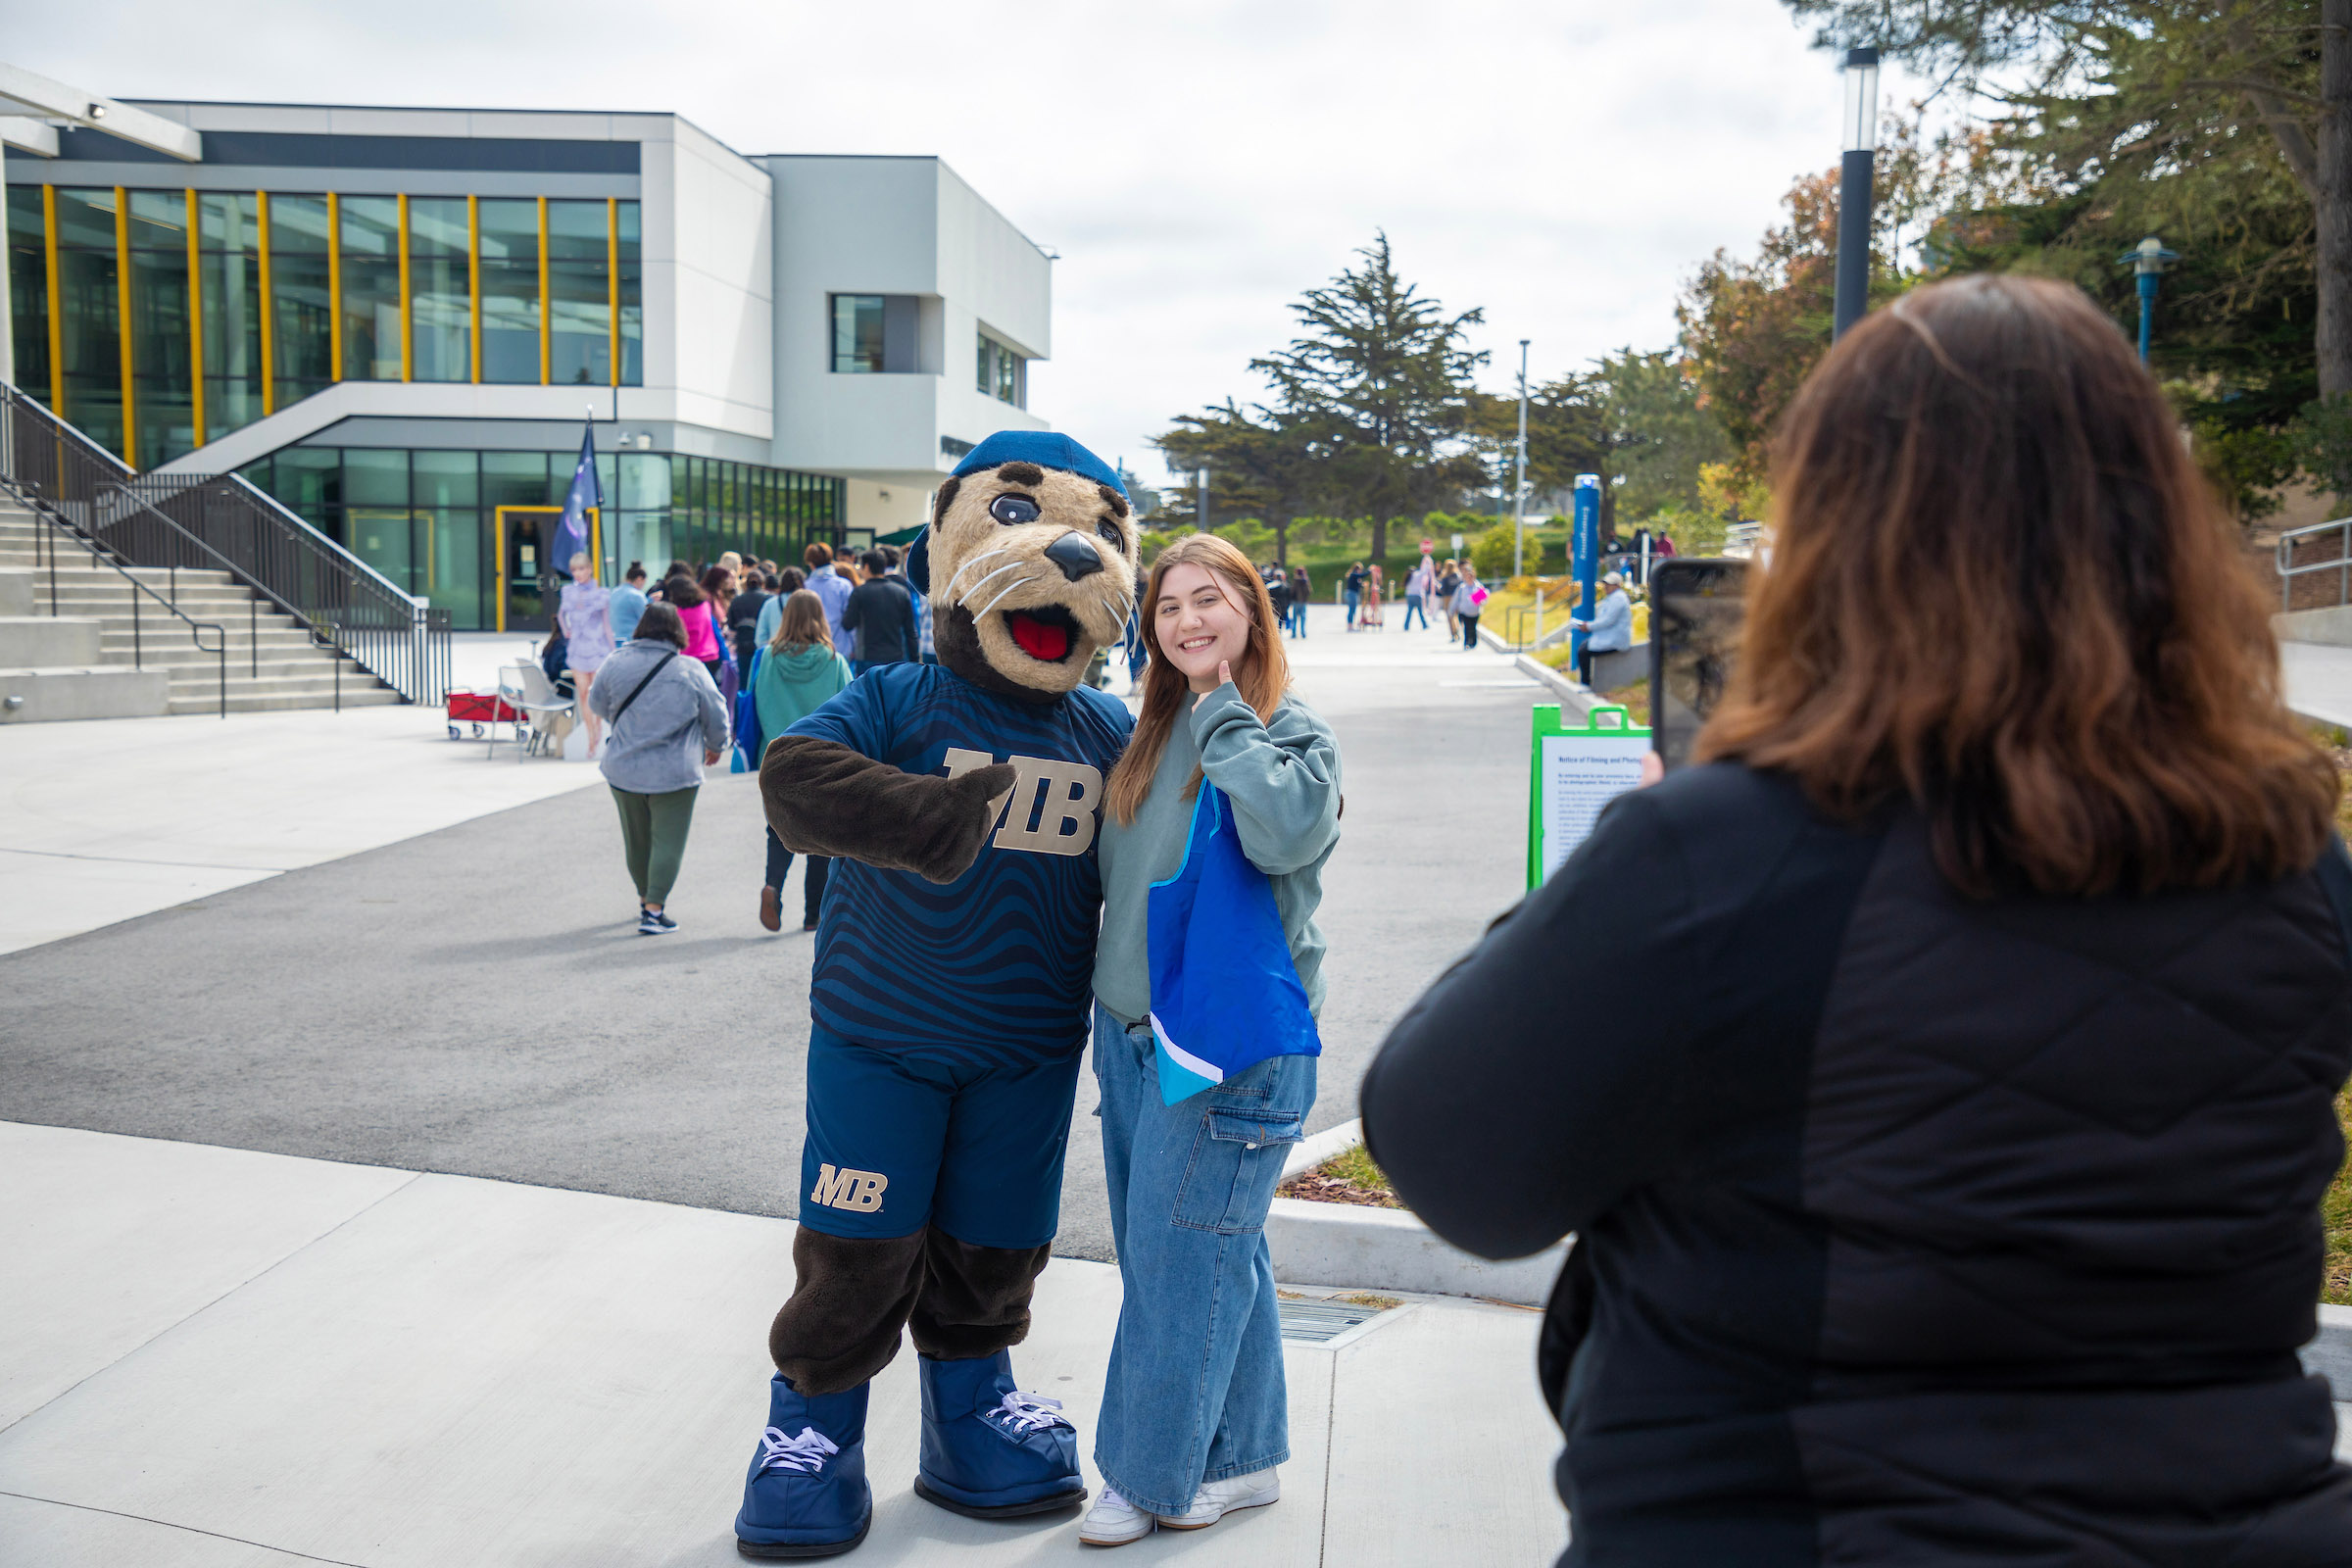 CSUMB sea otter mascot, Monte, stands next to a smiling, prospective student while a parent takes a cellphone photo.